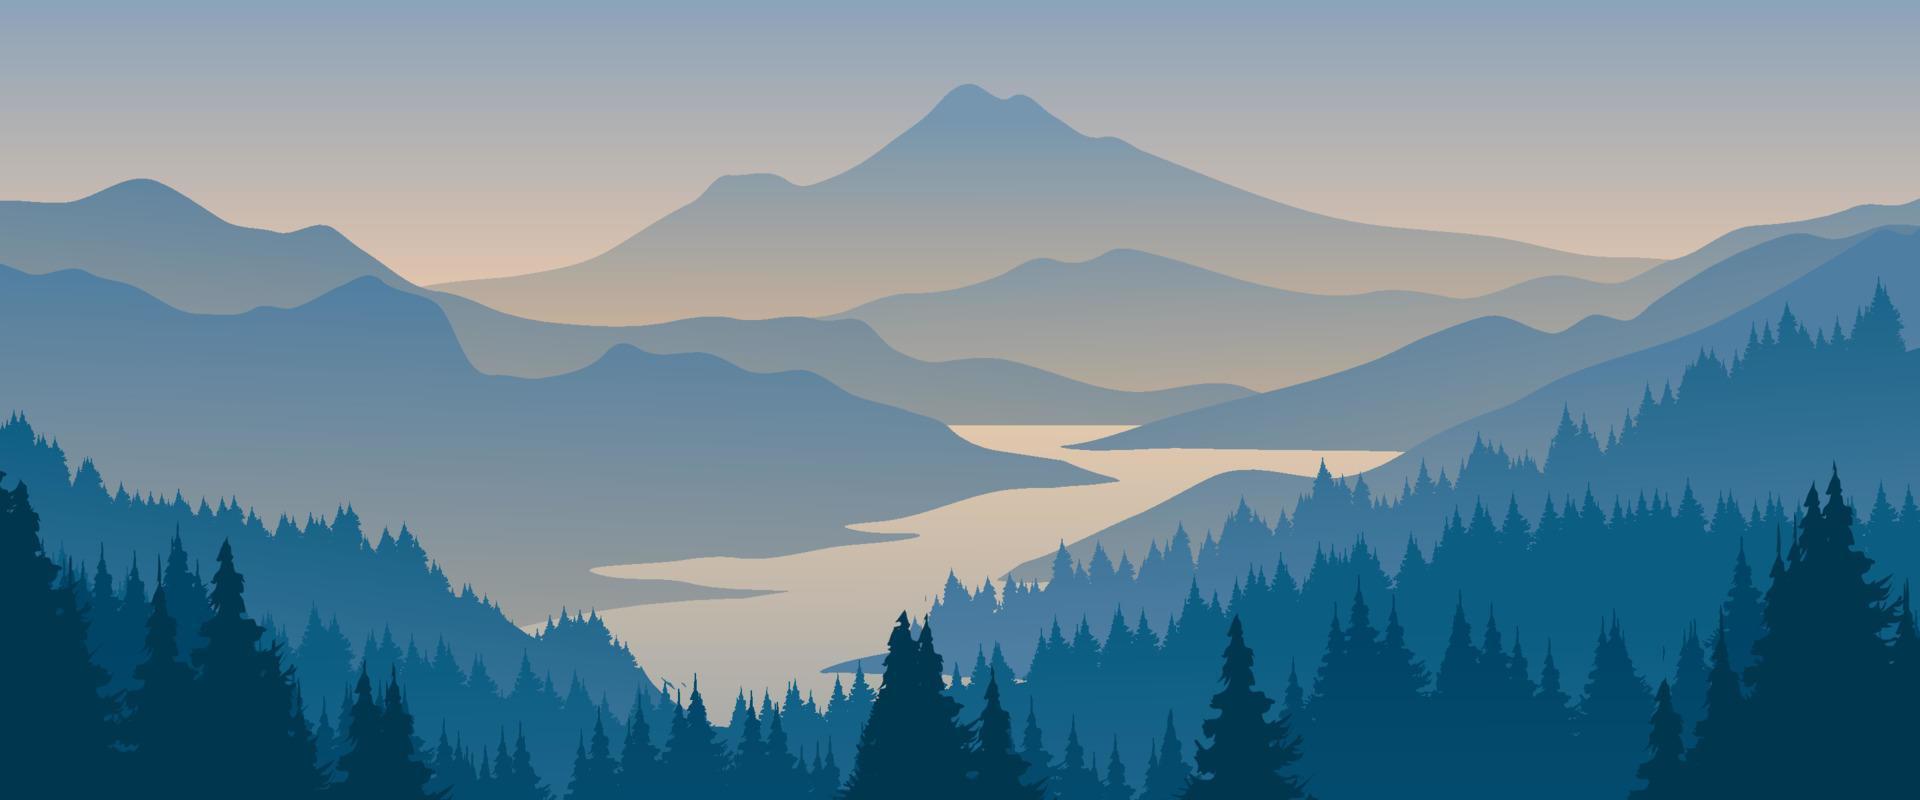 Vector mountain landscape illustration with lake and forest. Foggy mountain silhouette scenery